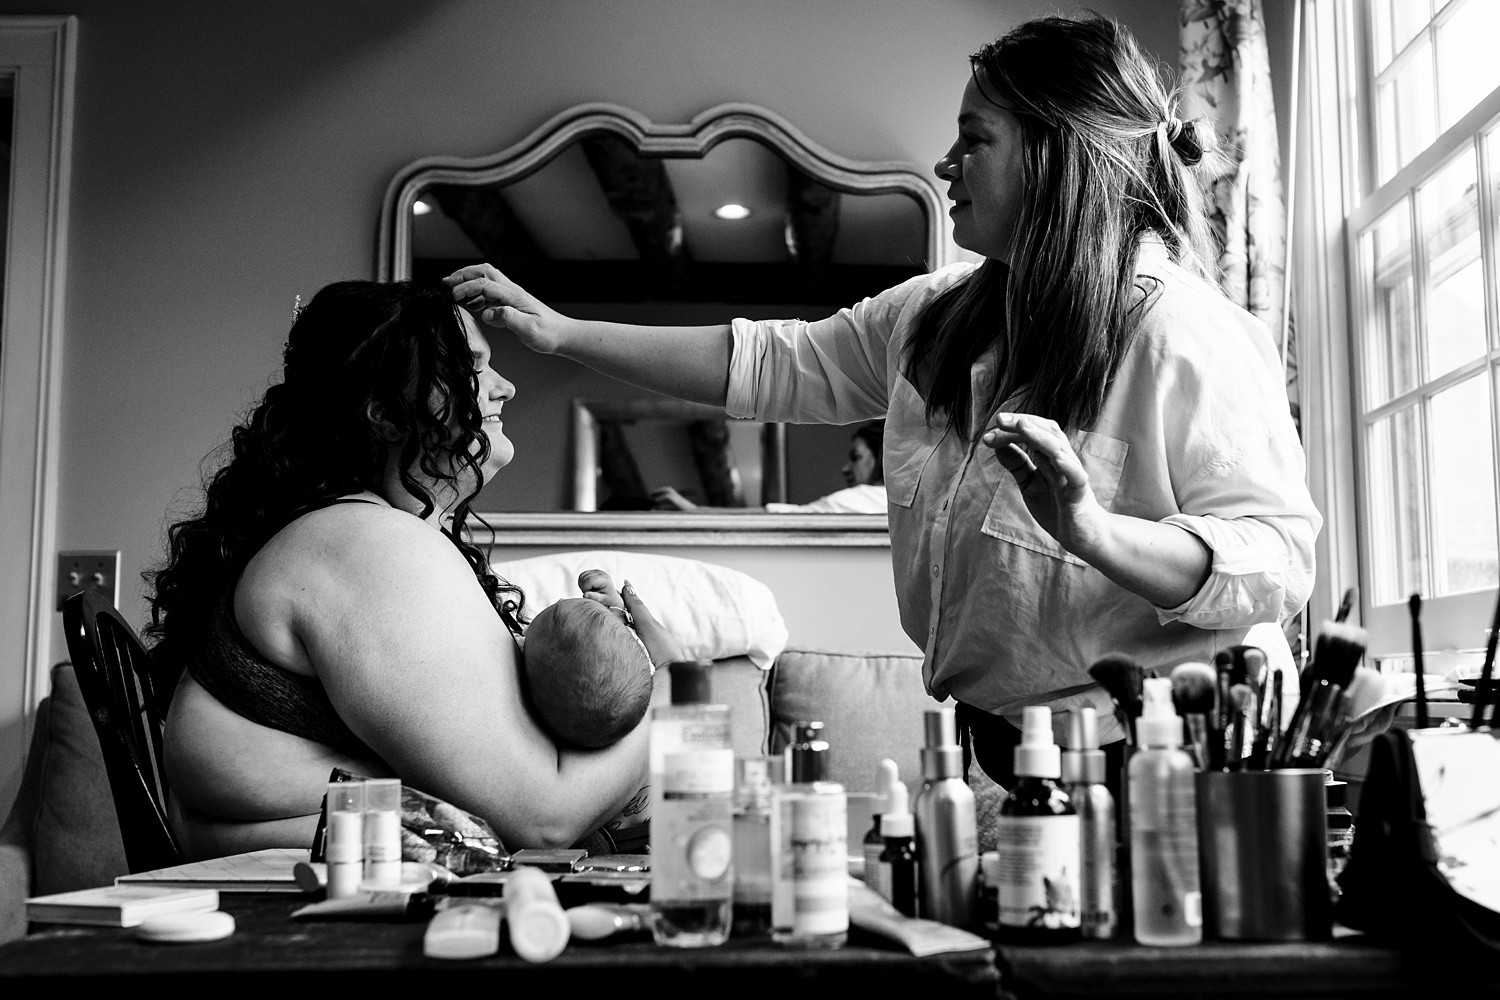 The bride gets her hair touched up while holding her son